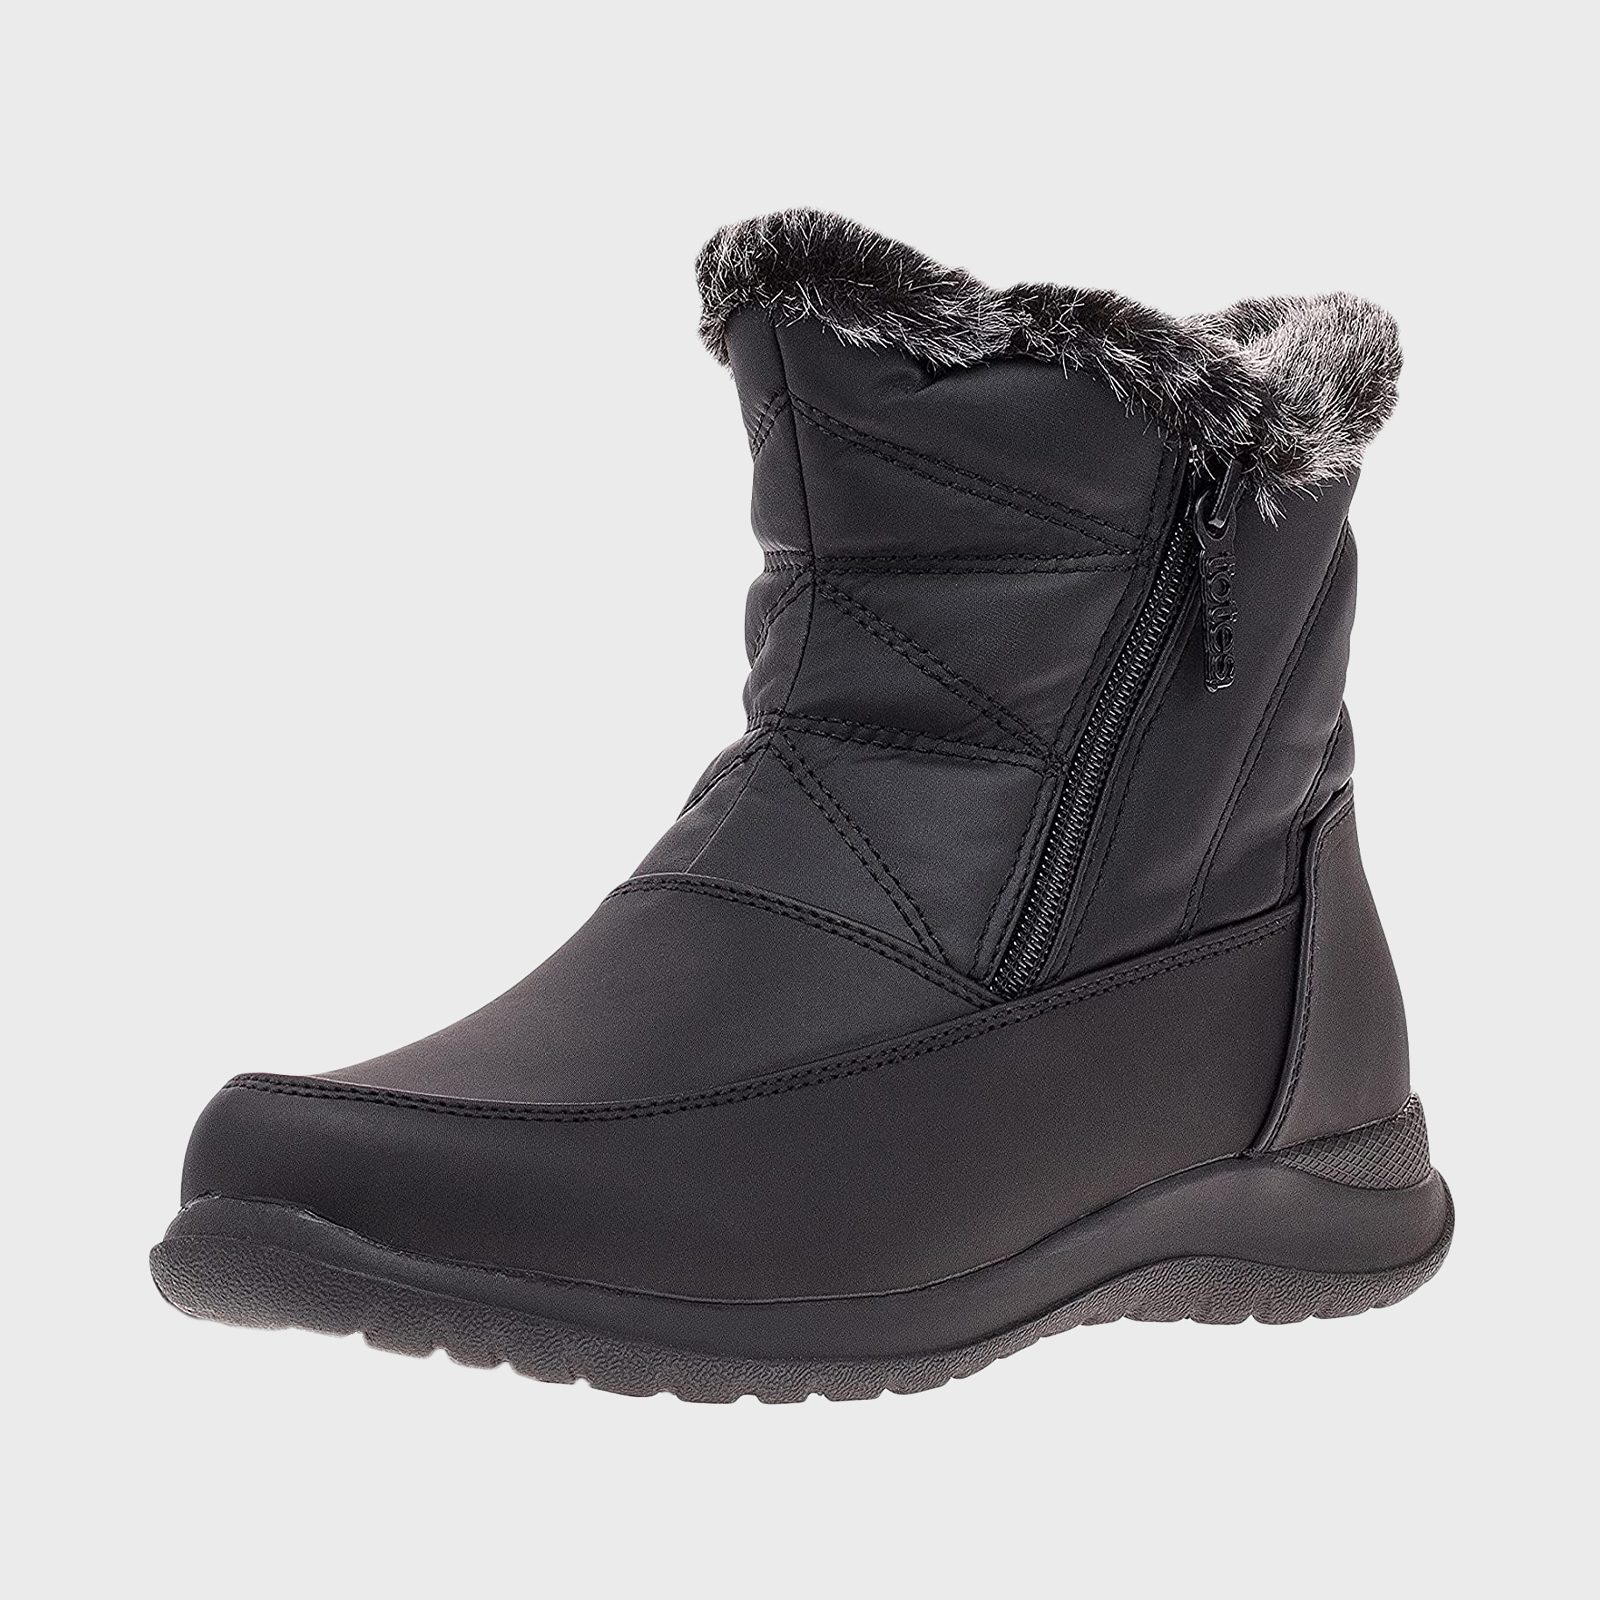 HARENCE Winter Snow Boots for Women Comfortable